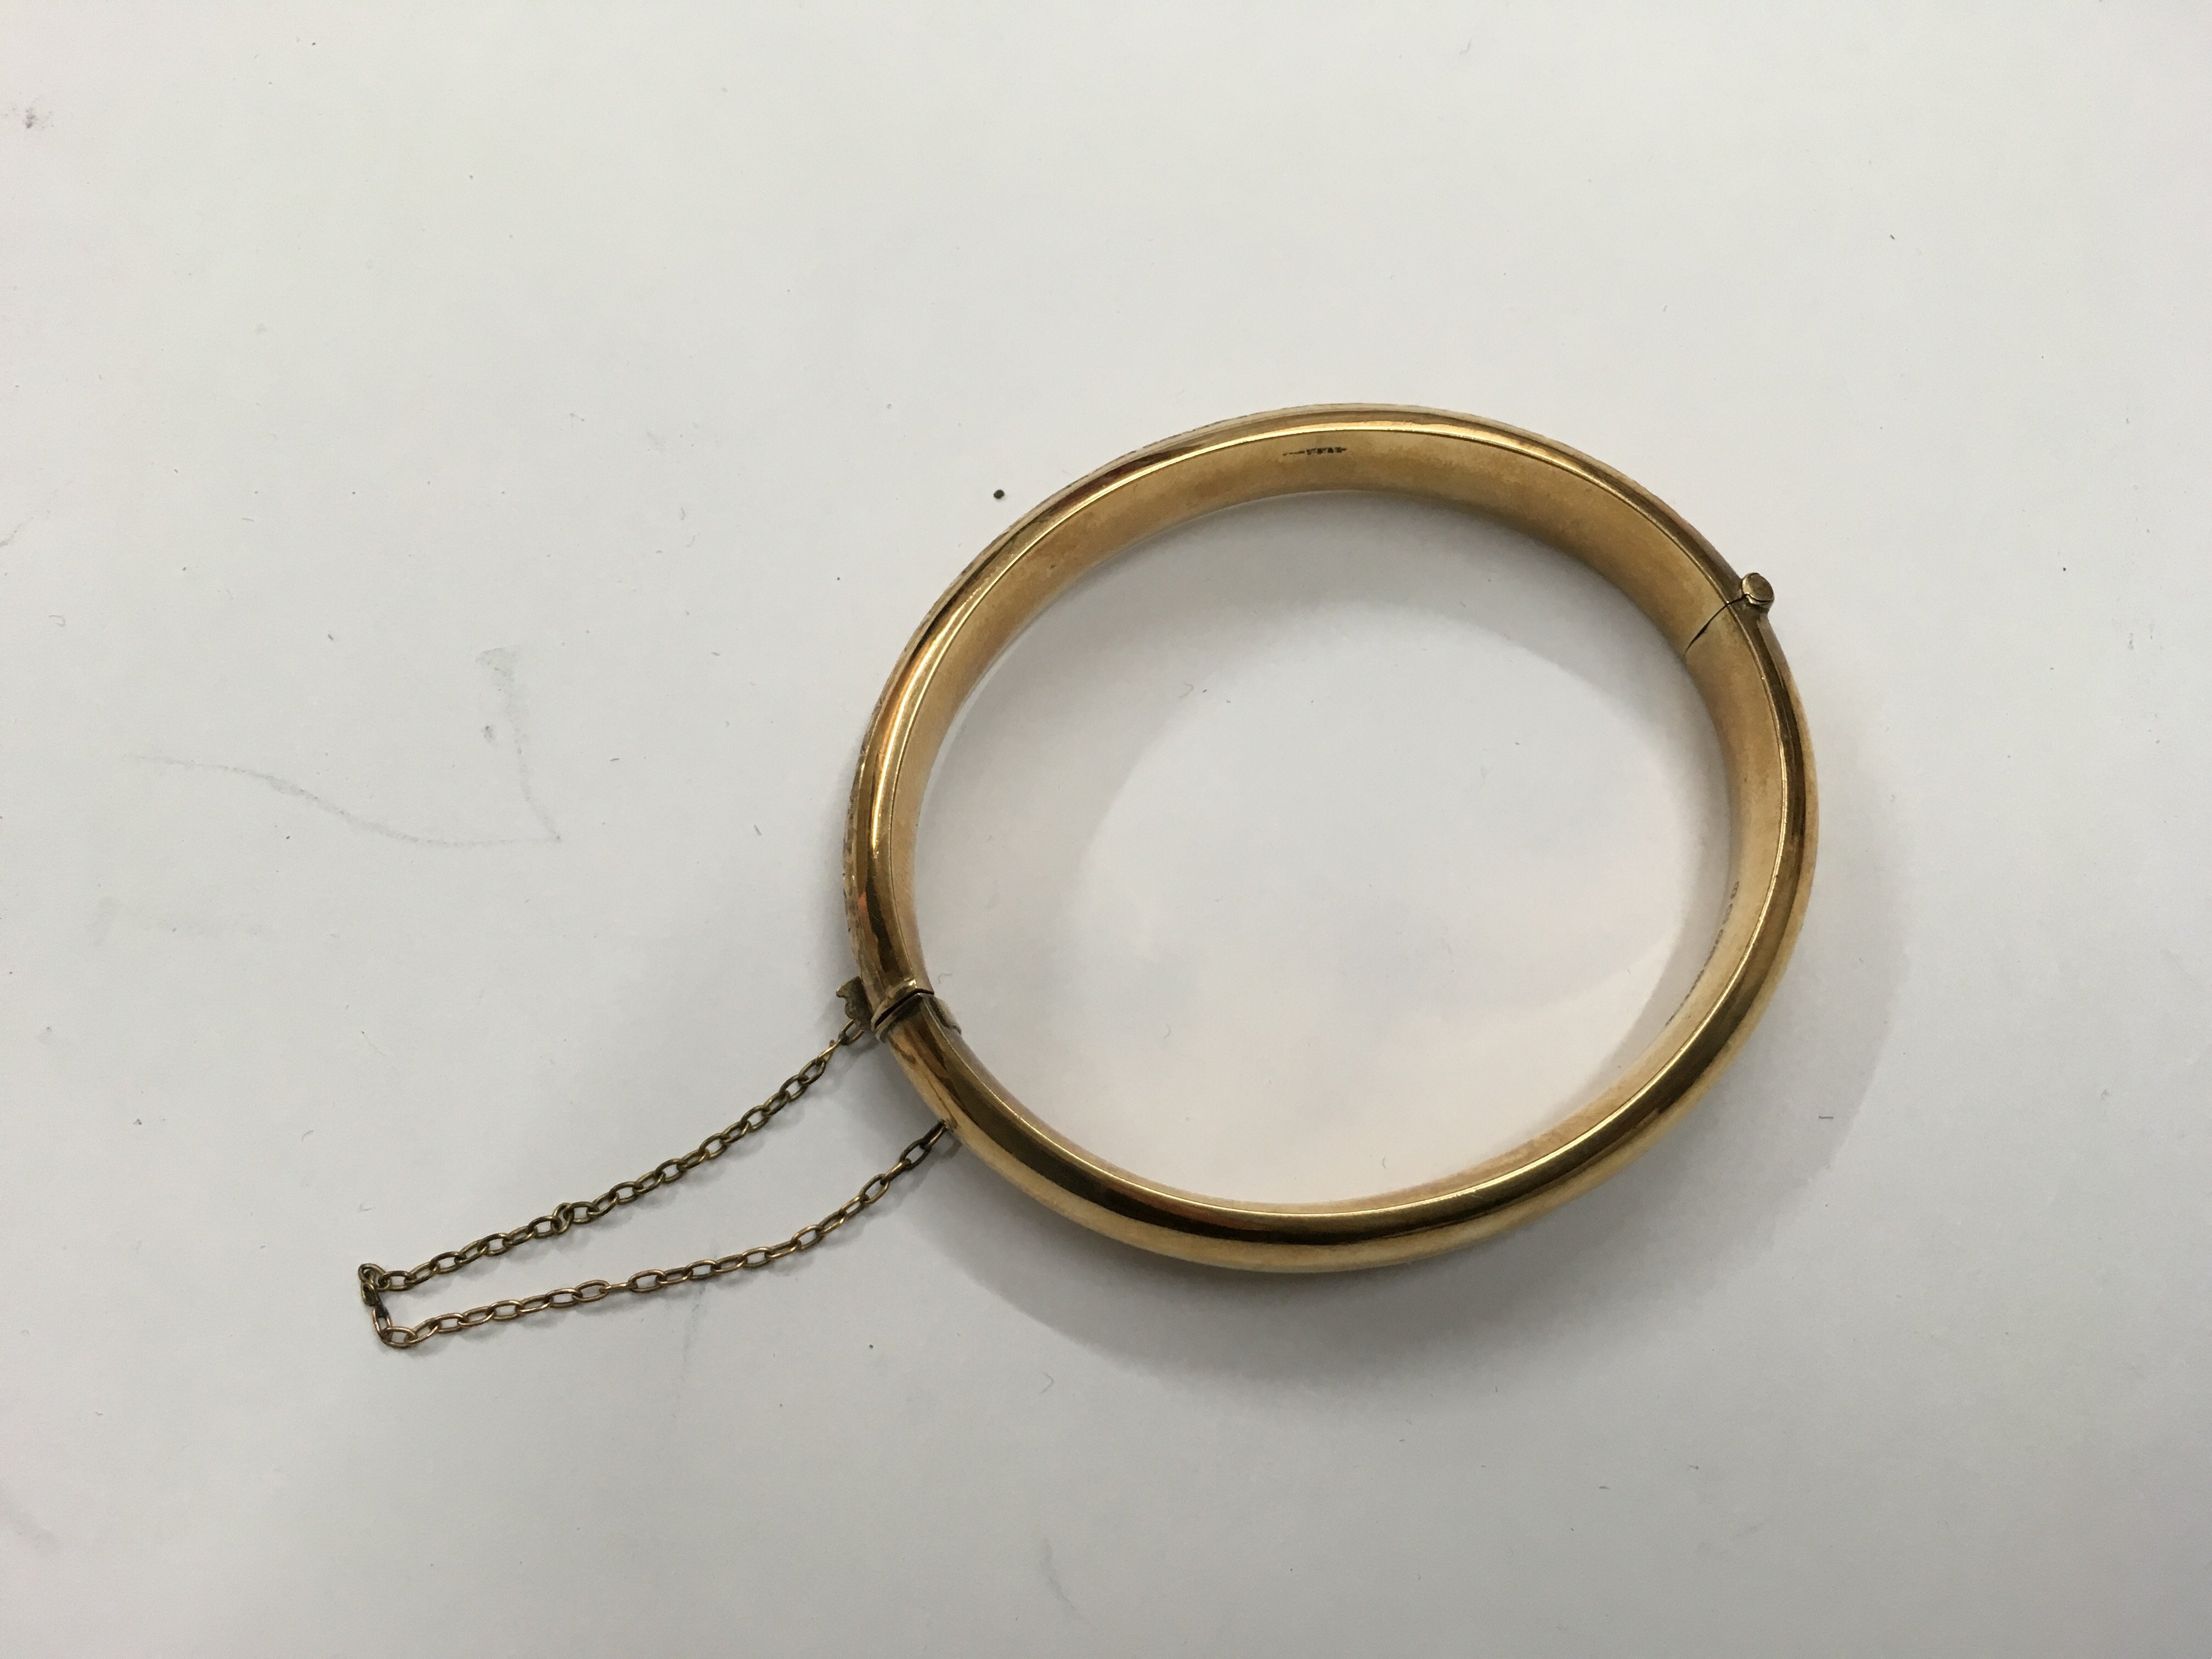 A 9ct gold bangle. Weight approx 13g